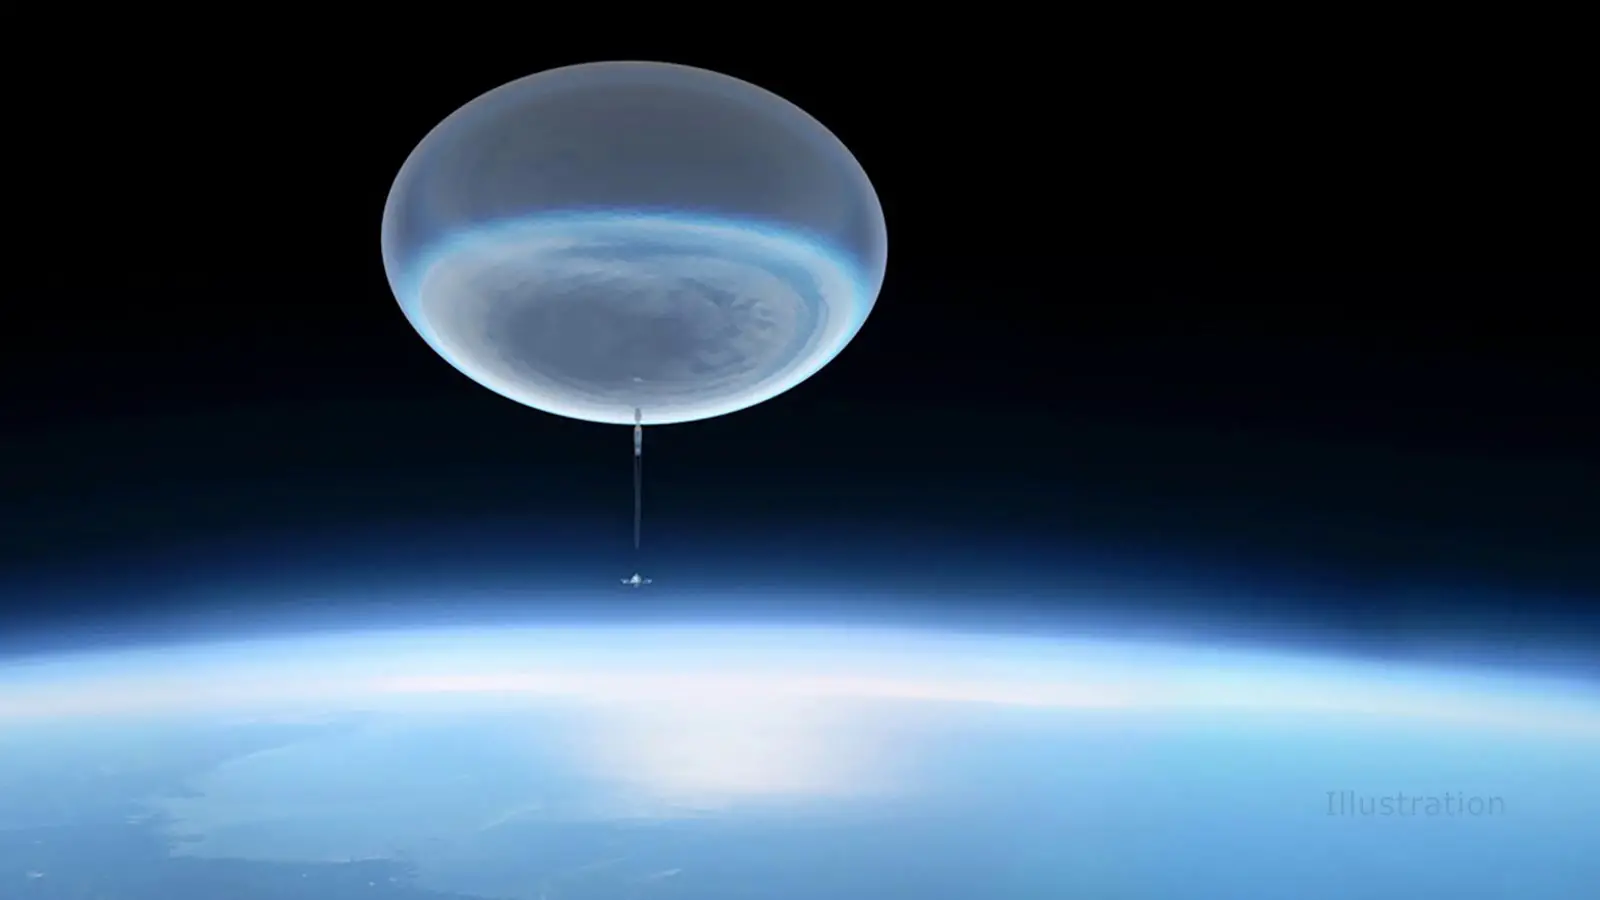 NASA forced to ditch ‘football stadium-sized’ balloon in the ocean